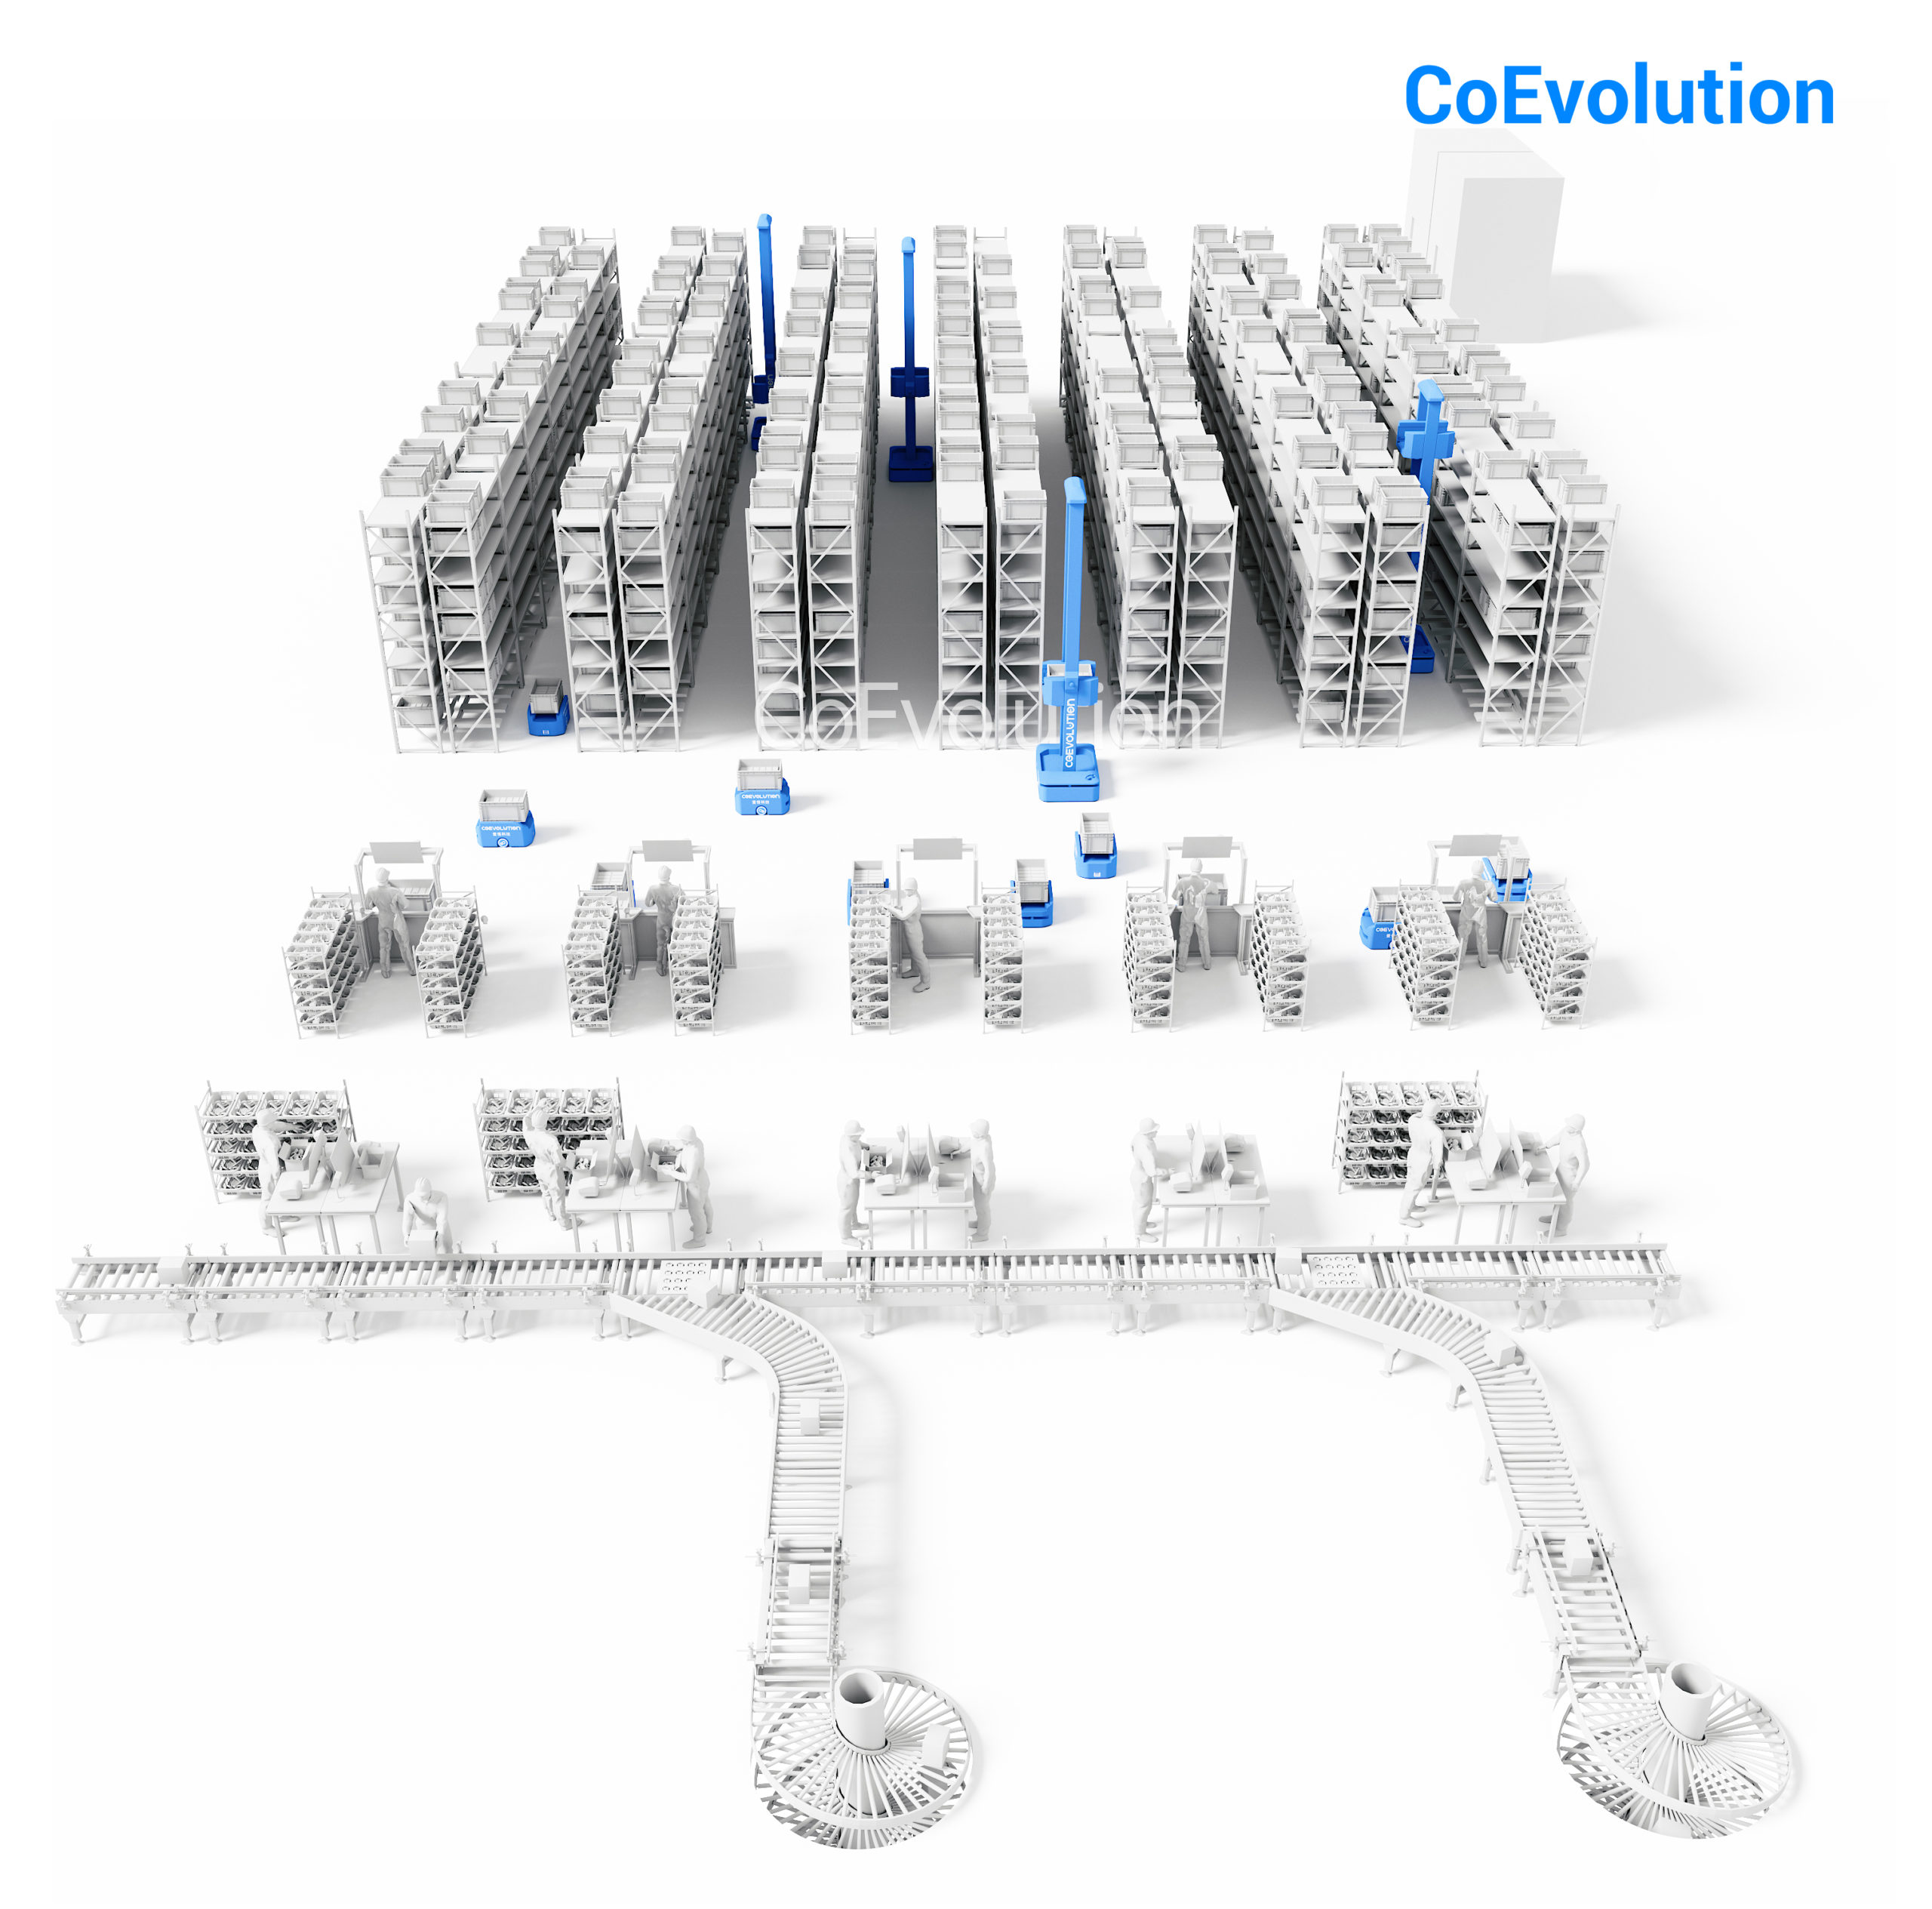 CoEvolution's solutions allow mobile robots from multiple vendors to be integrated into automation solutions